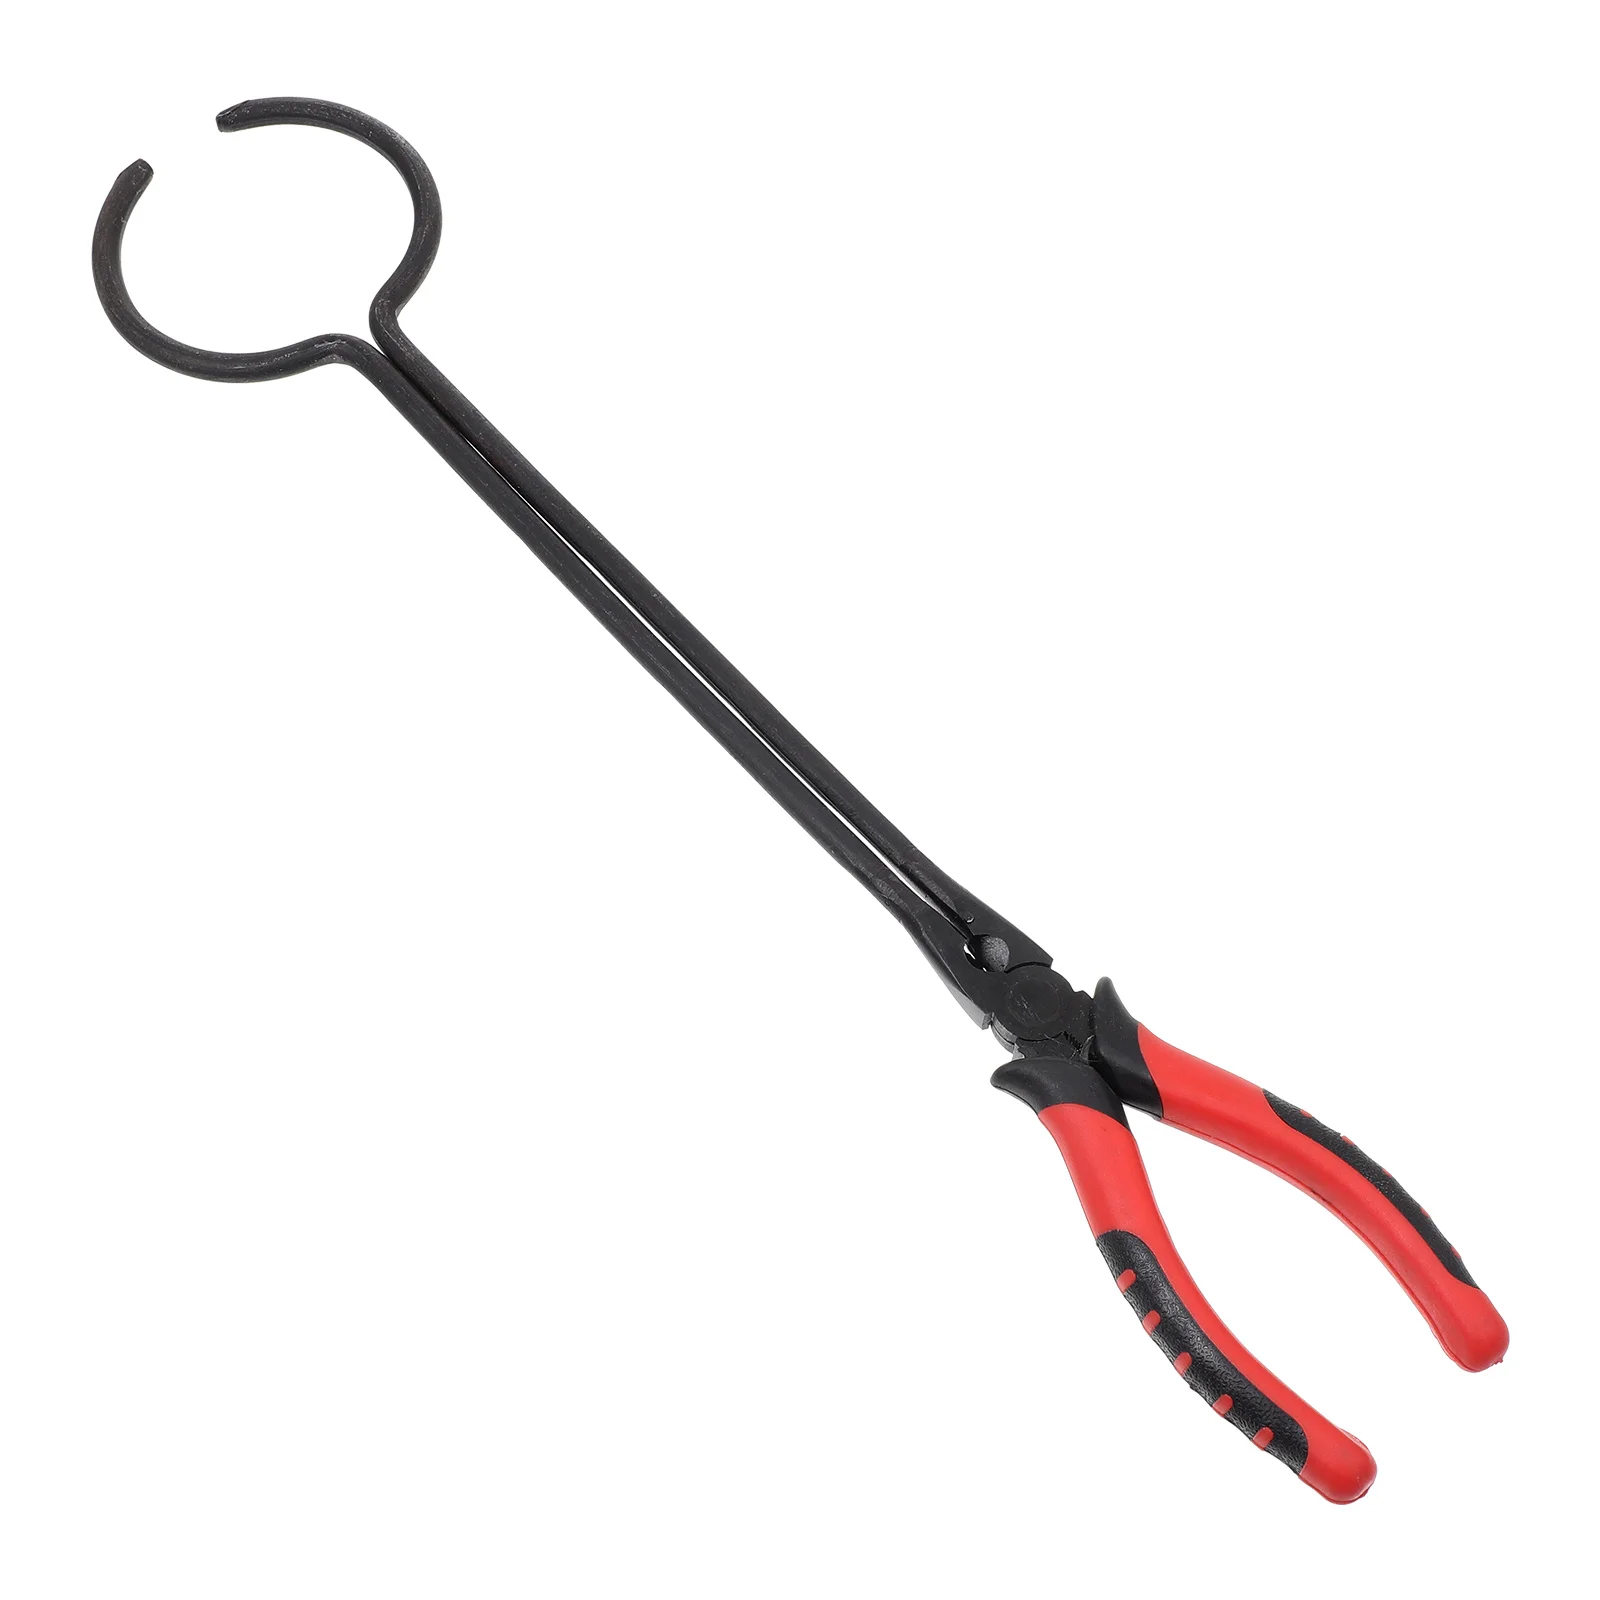 

Crucible Tongs Metal Refining Casting Tool Gold Melting Accessory Charcoal Holder Smelting Furnace Clamp Plastic Pliers Tools